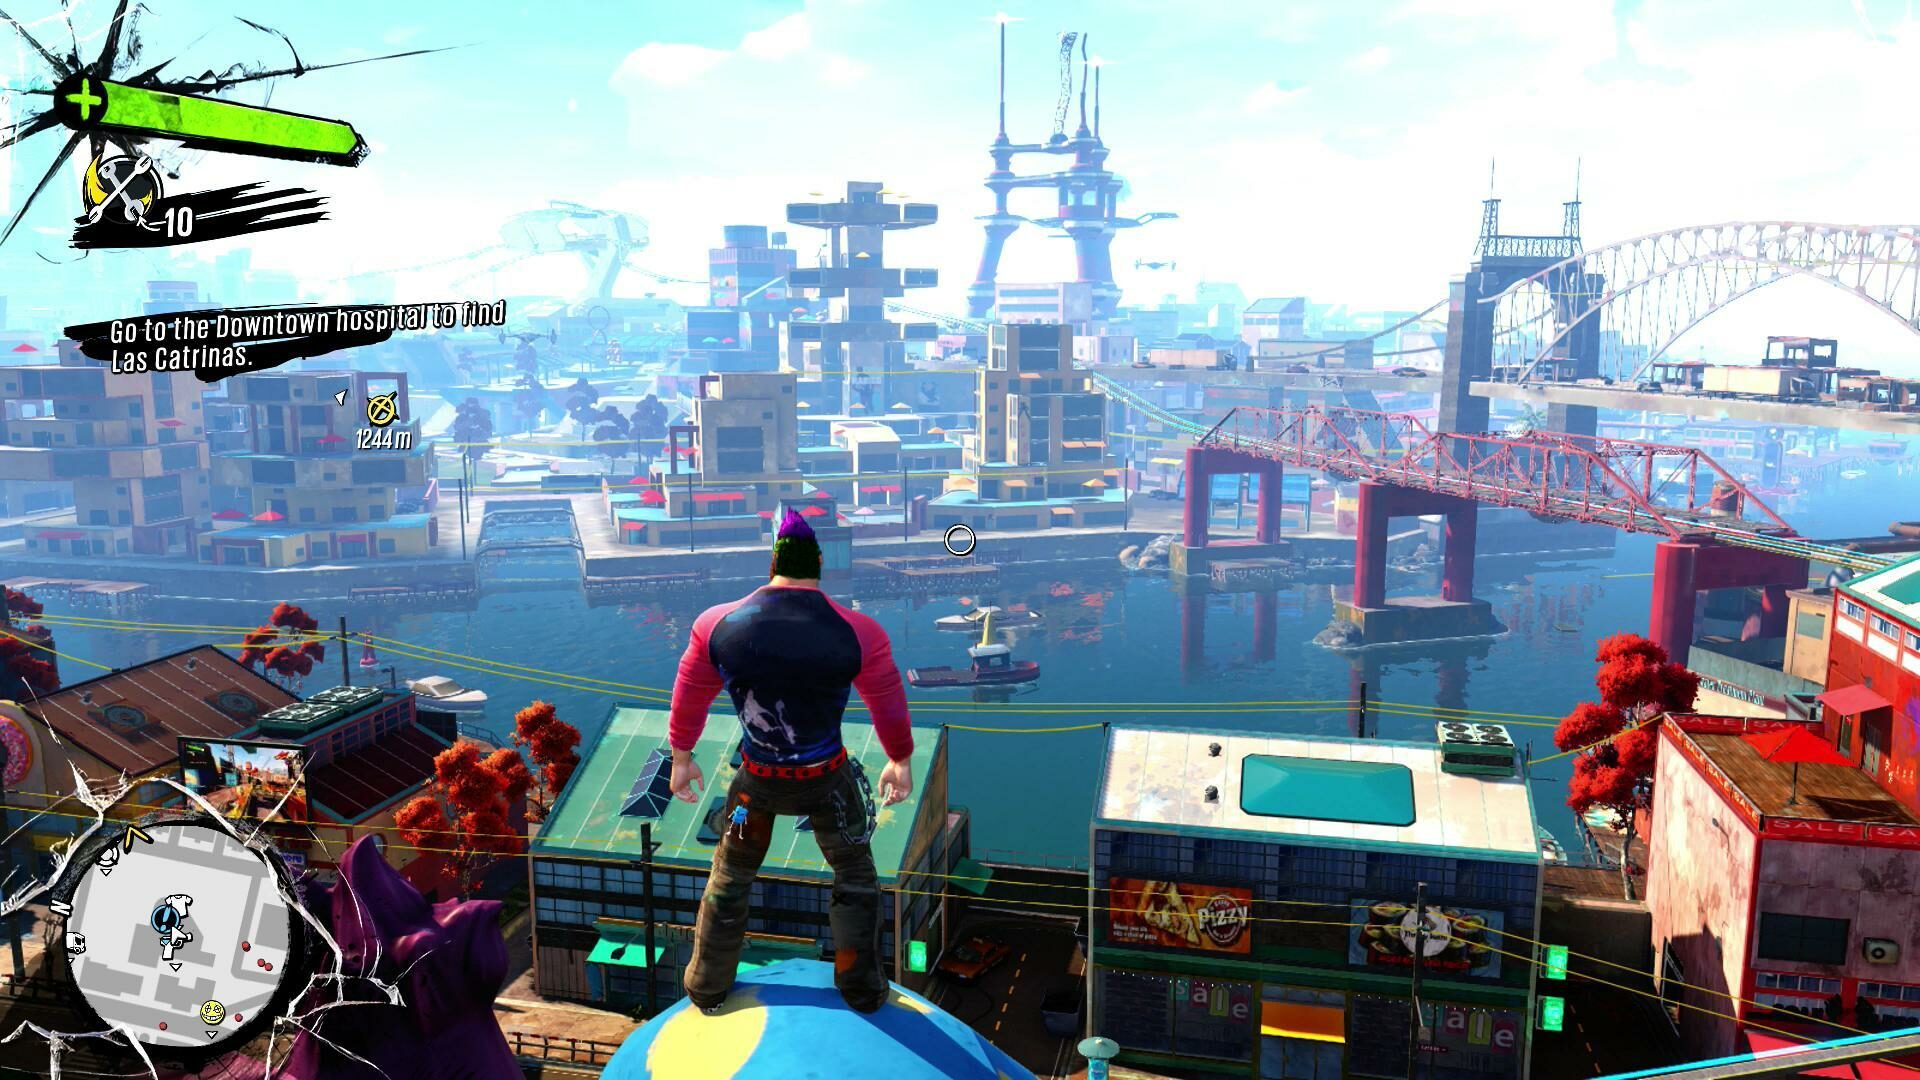 Sunset Overdrive Jogo Xbox One Mídia Digital - Playce - Games & Gift Cards 